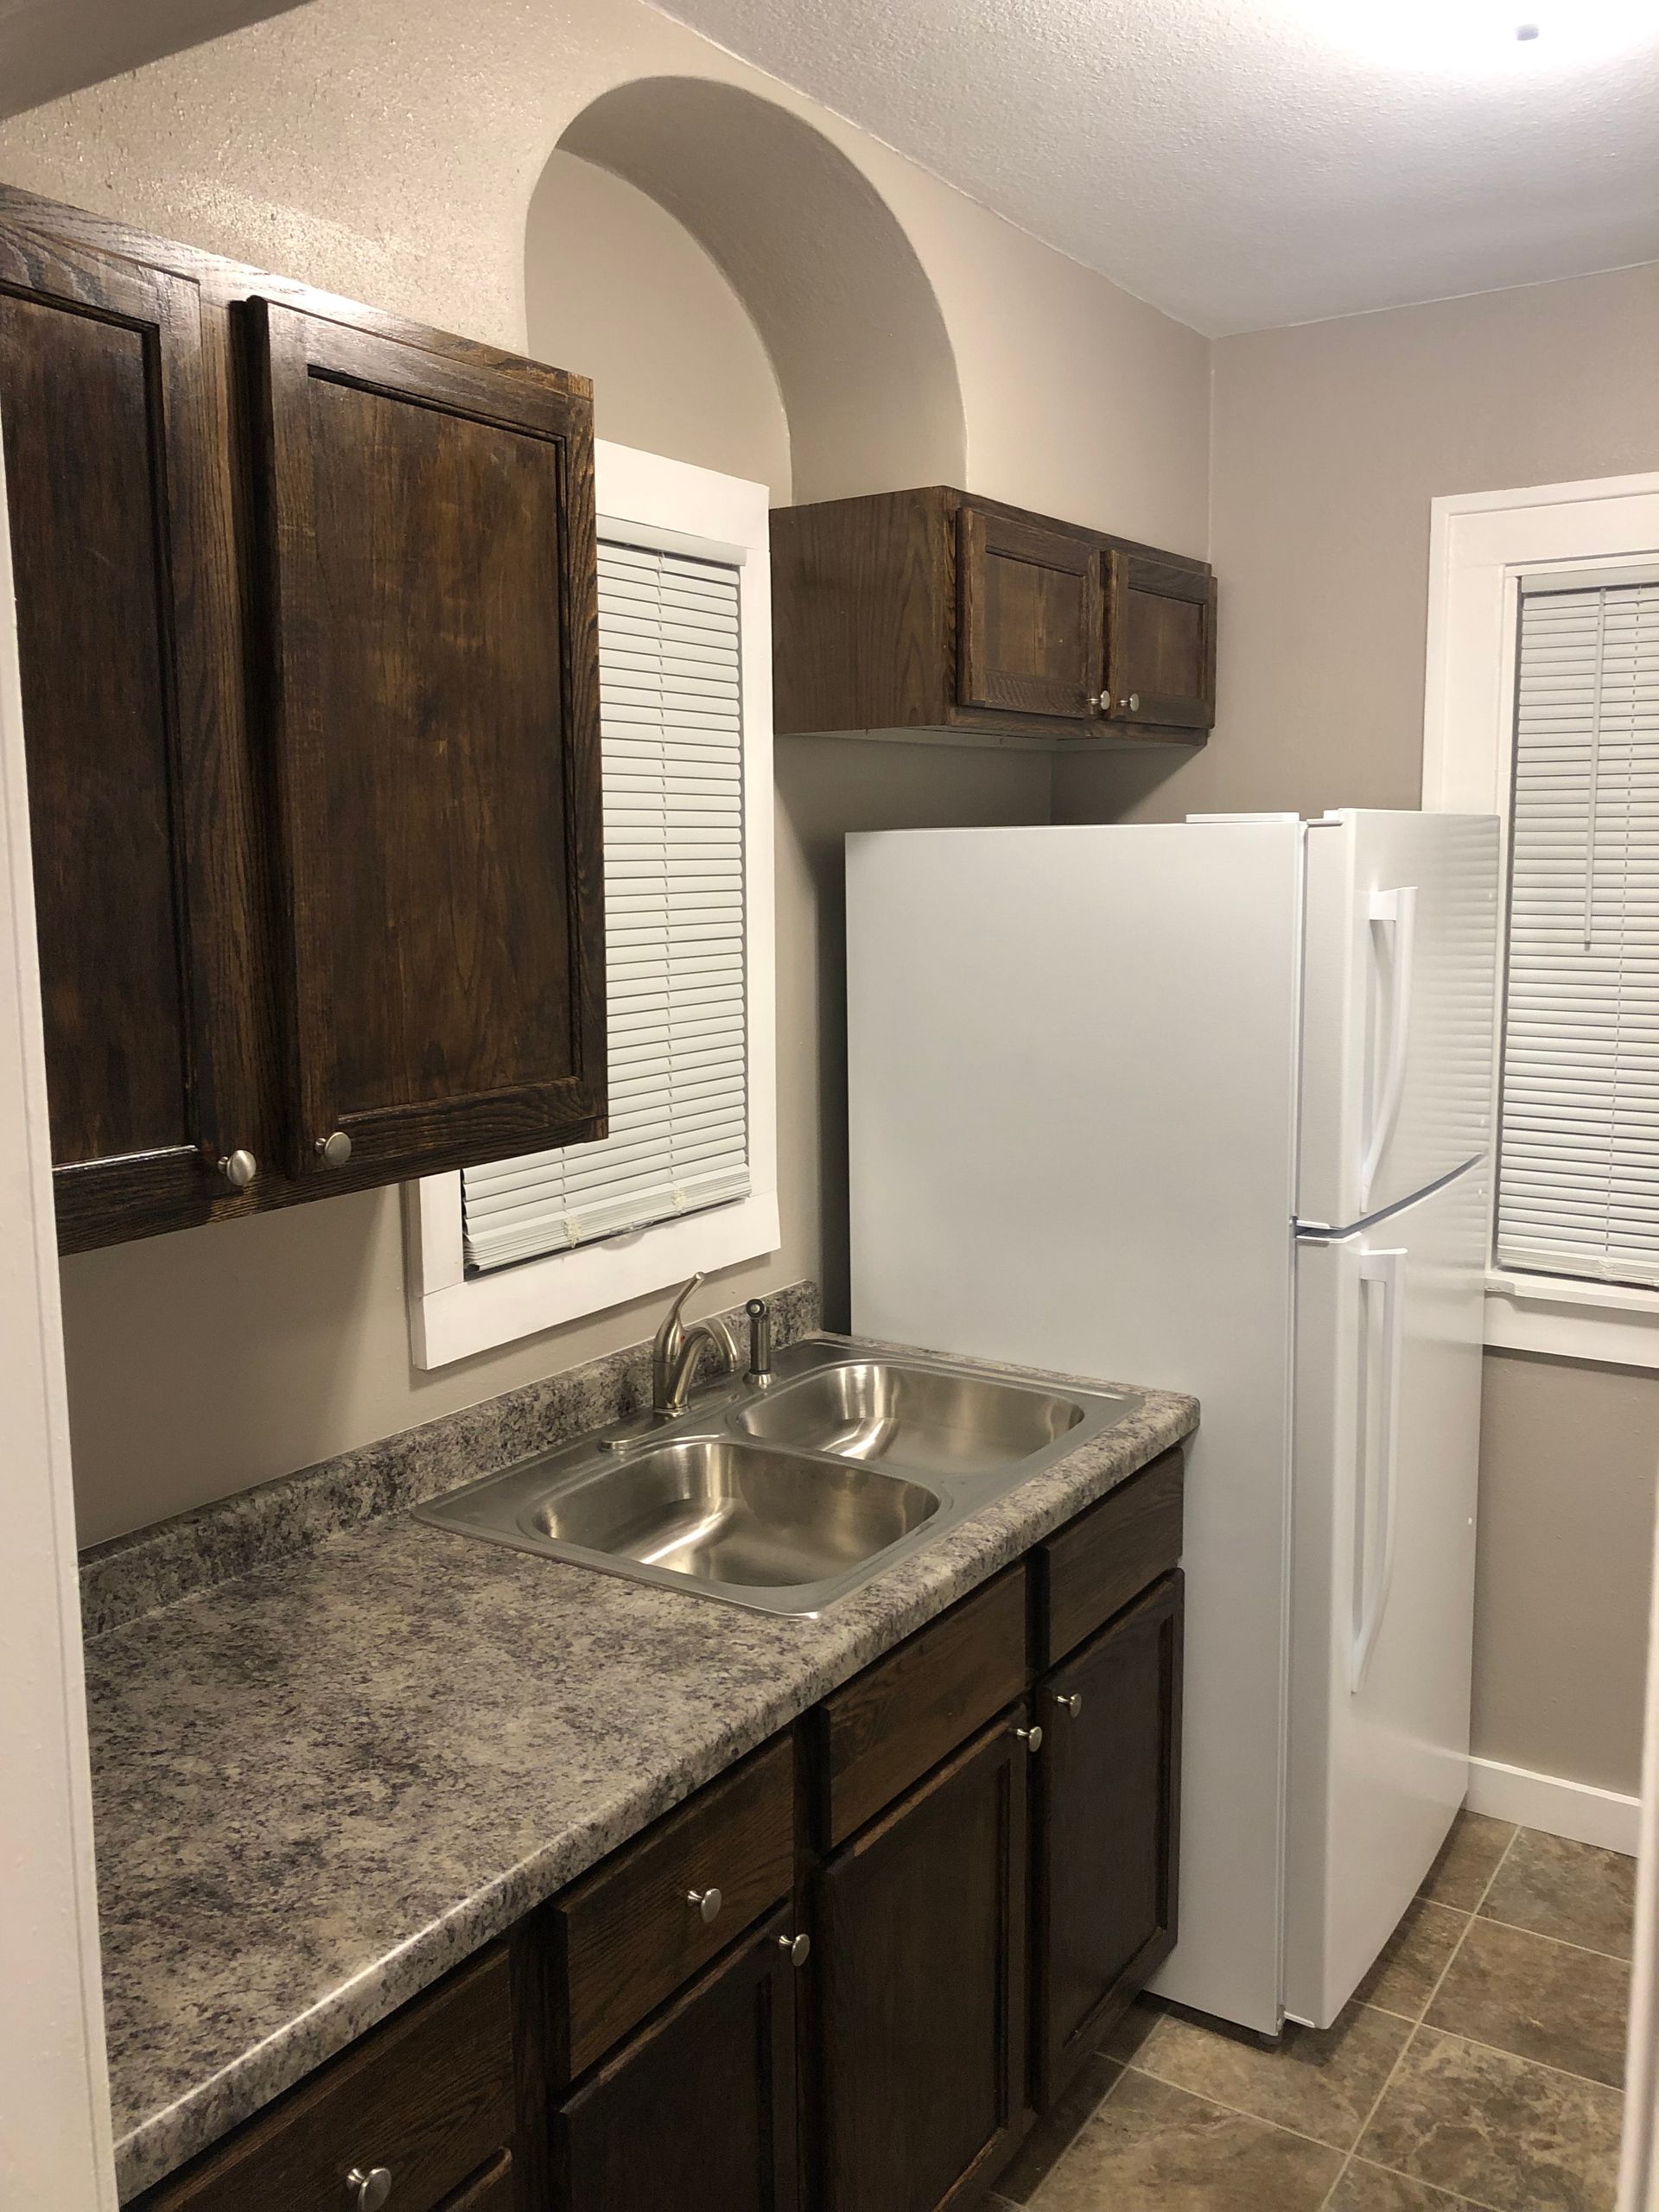 A kitchen with two sinks and a refrigerator